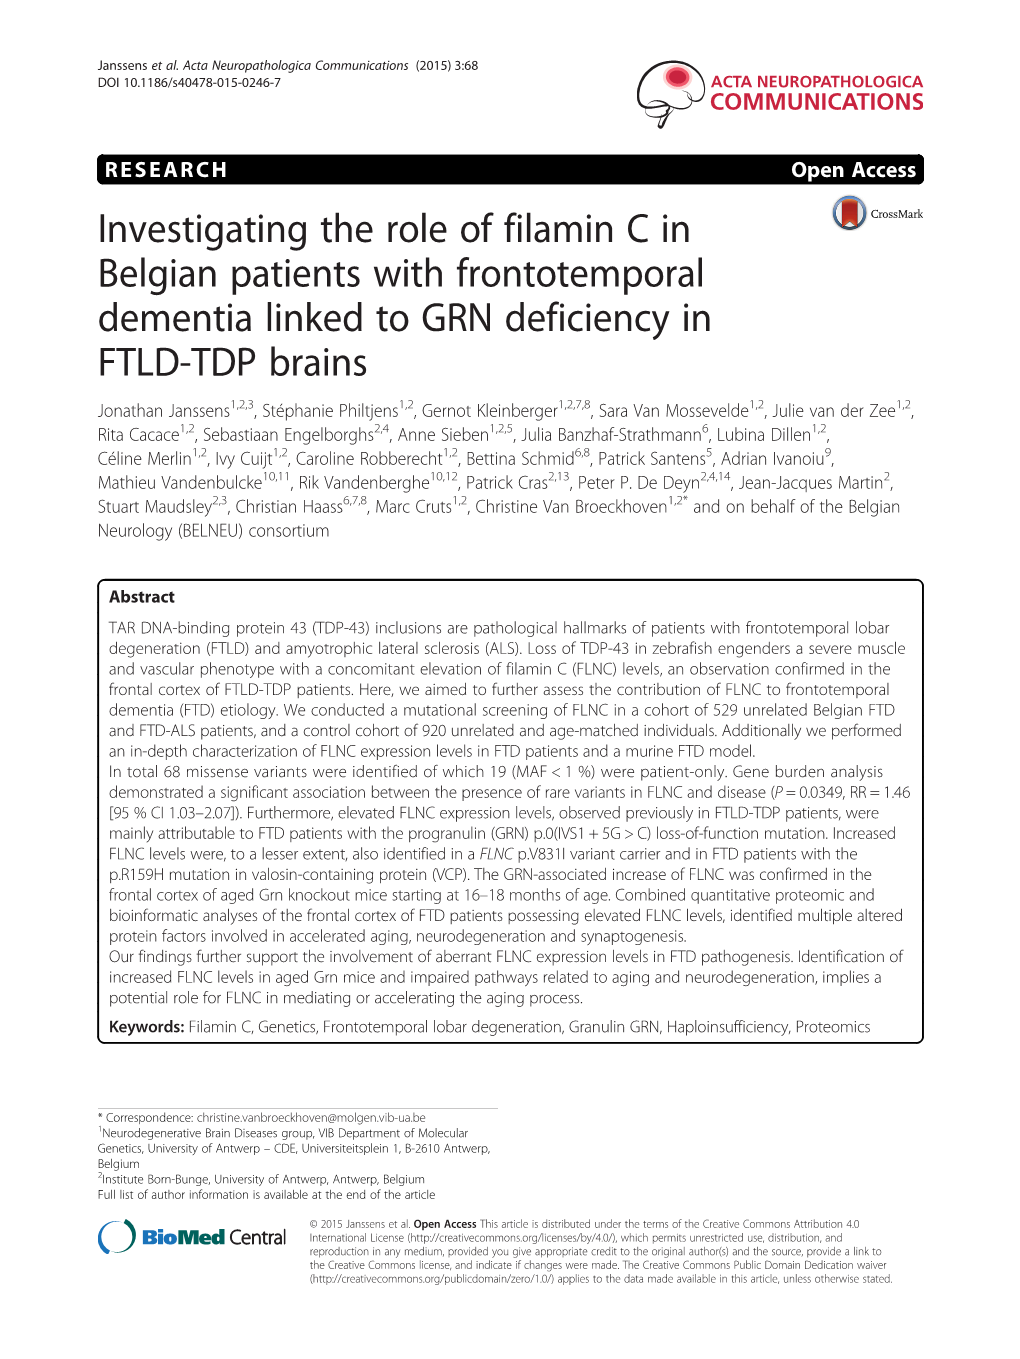 Investigating the Role of Filamin C in Belgian Patients with Frontotemporal Dementia Linked to GRN Deficiency in FTLD-TDP Brains